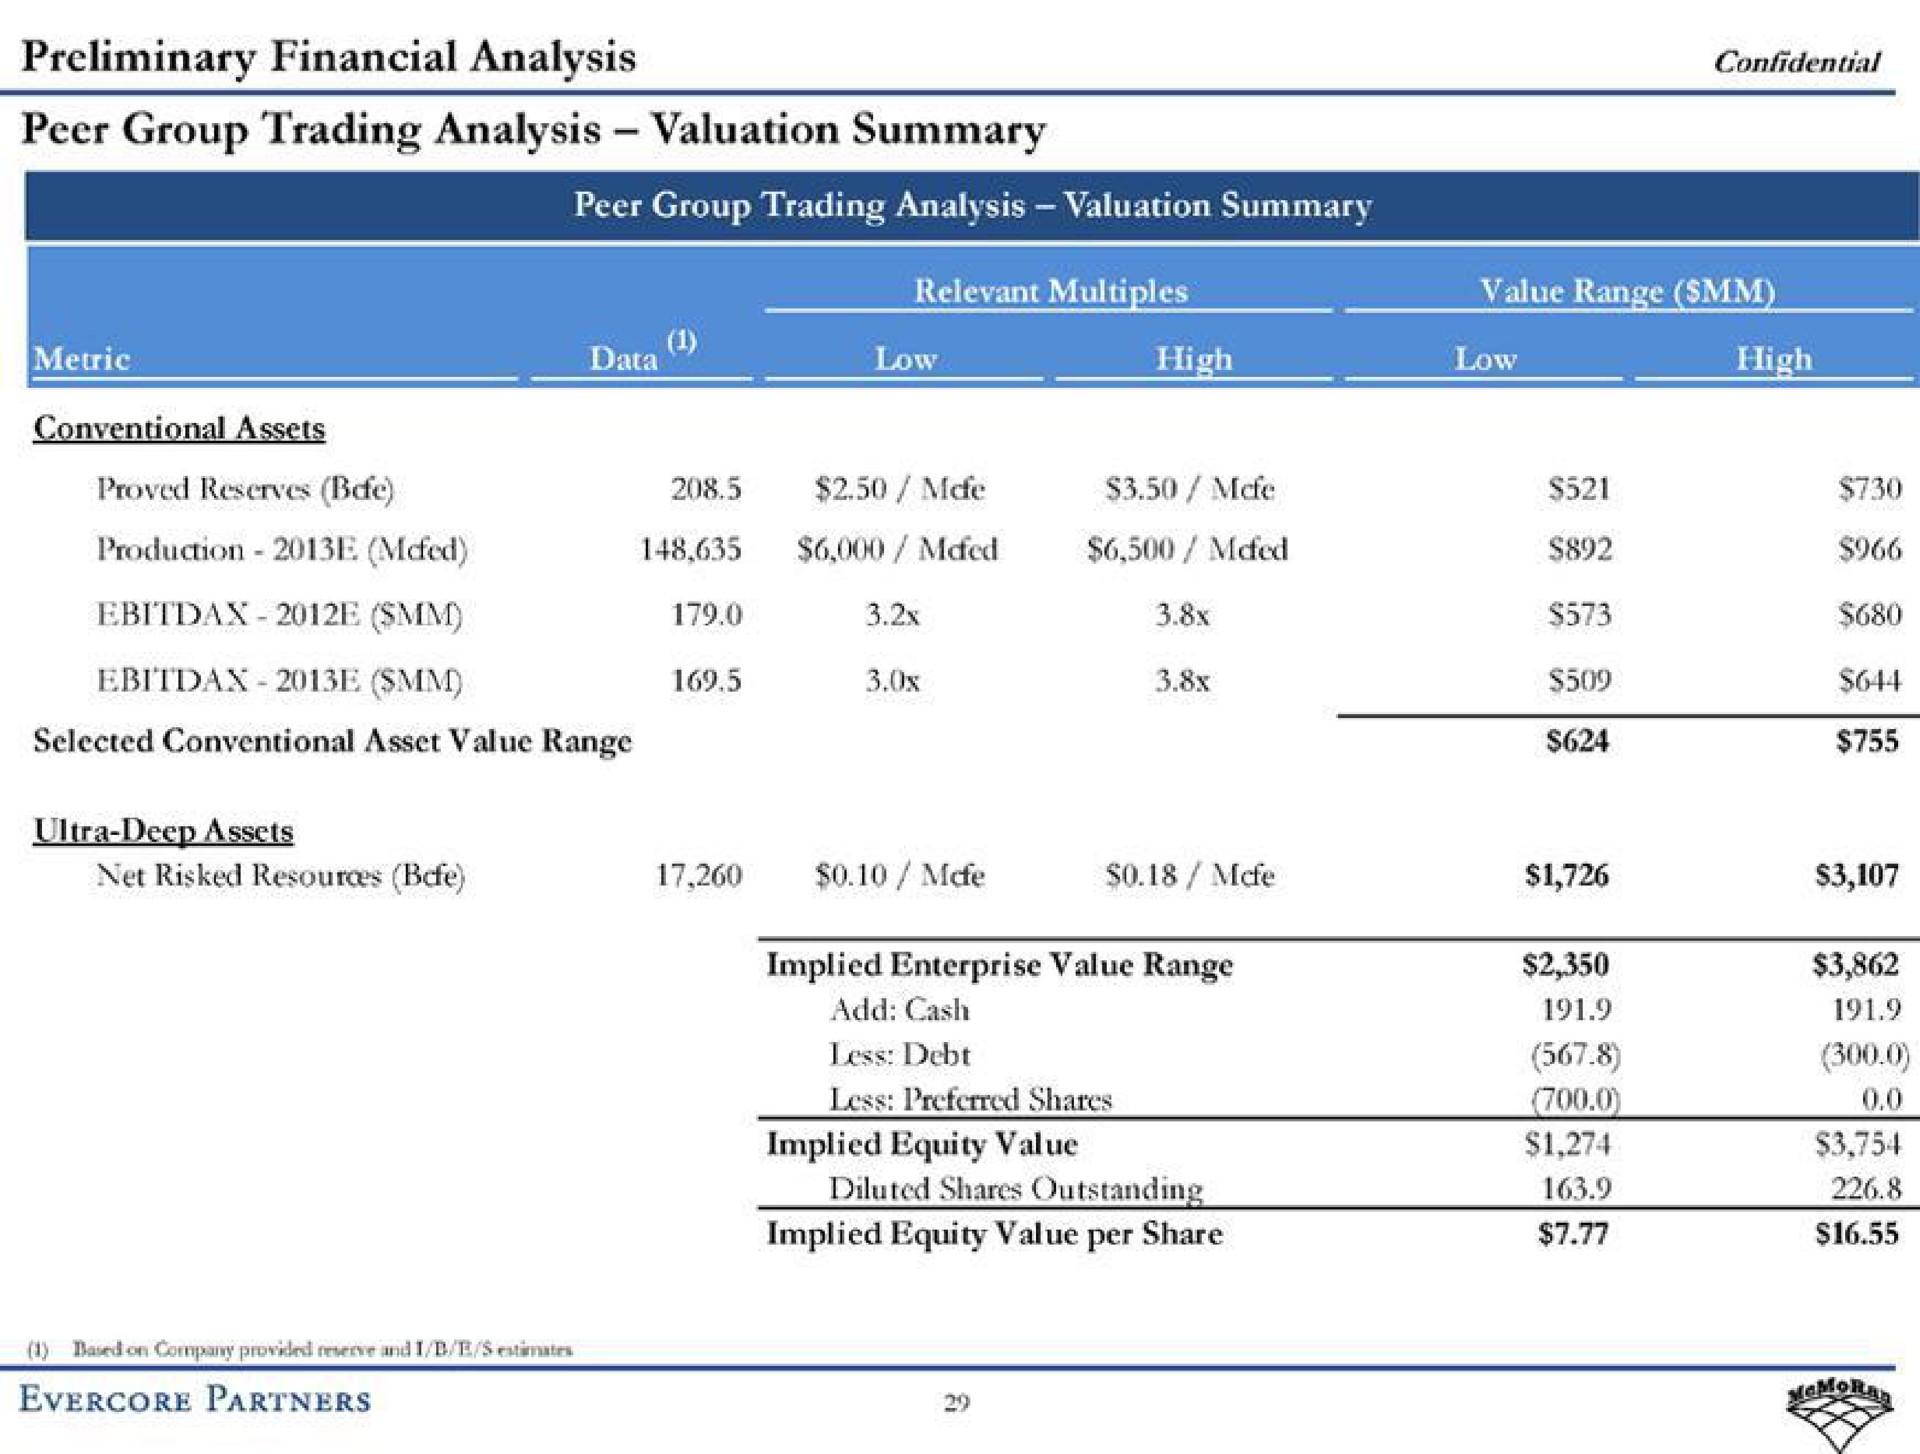 preliminary financial analysis peer group trading analysis valuation summary confidential roe dit the less debt implied equity value per share partners | Evercore